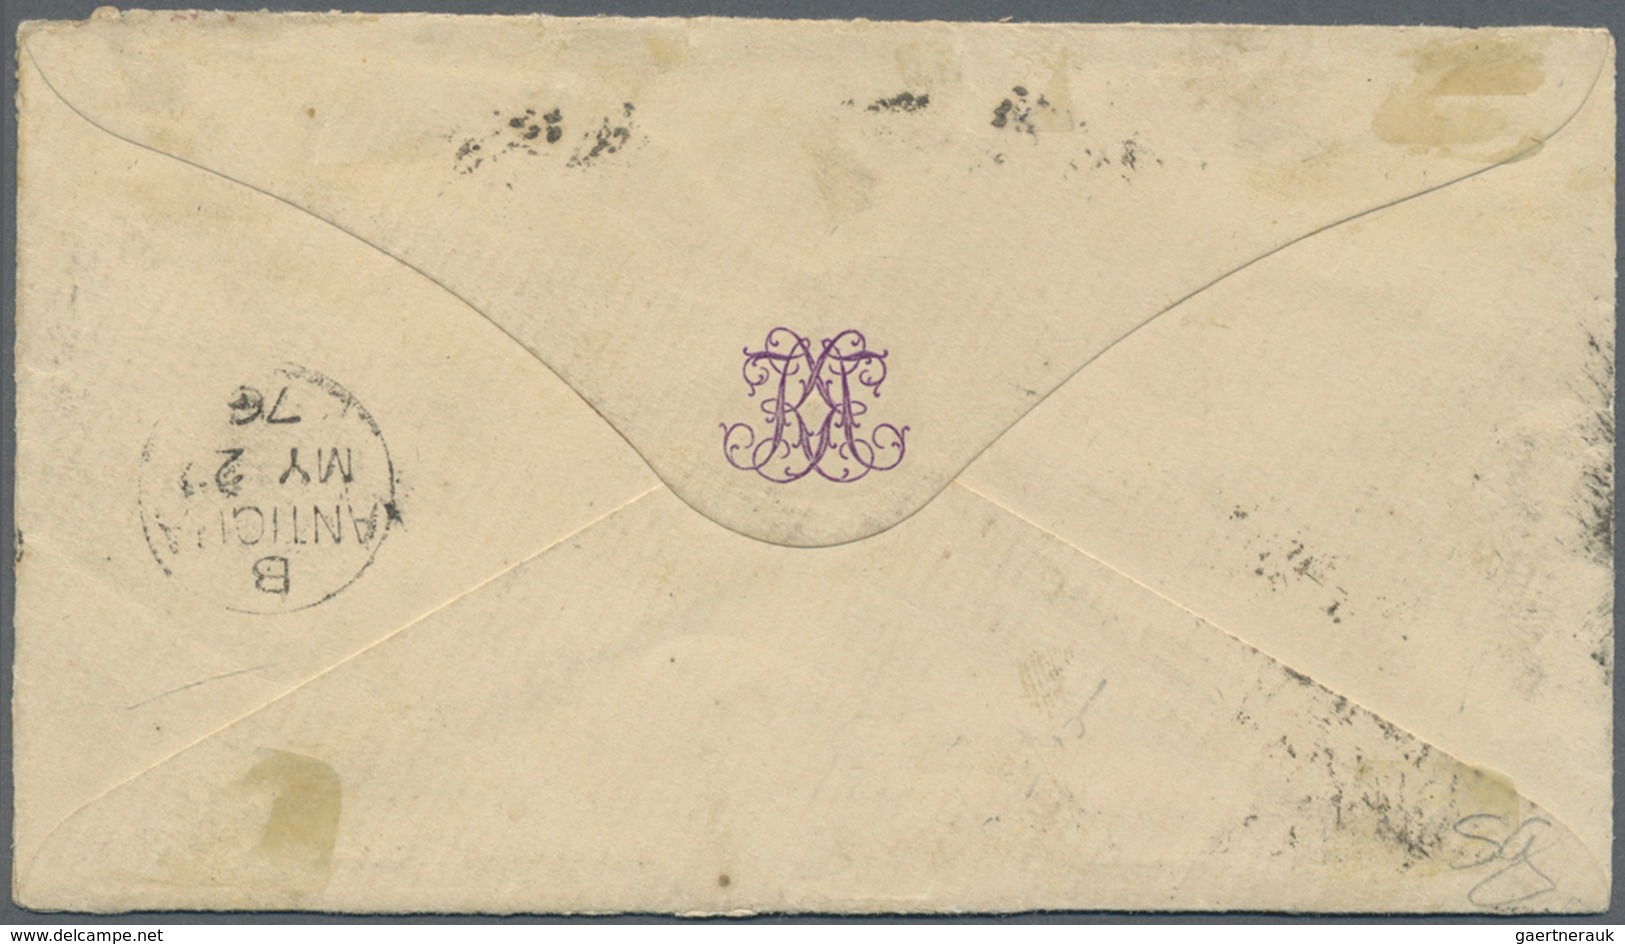 Br Antigua: 1876, QV 6d Perf. 12 1/2 (pair) Canc. "A02" On Small Cover With "ANTIGUA MY 29 76" On Rever - 1858-1960 Kolonie Van De Kroon